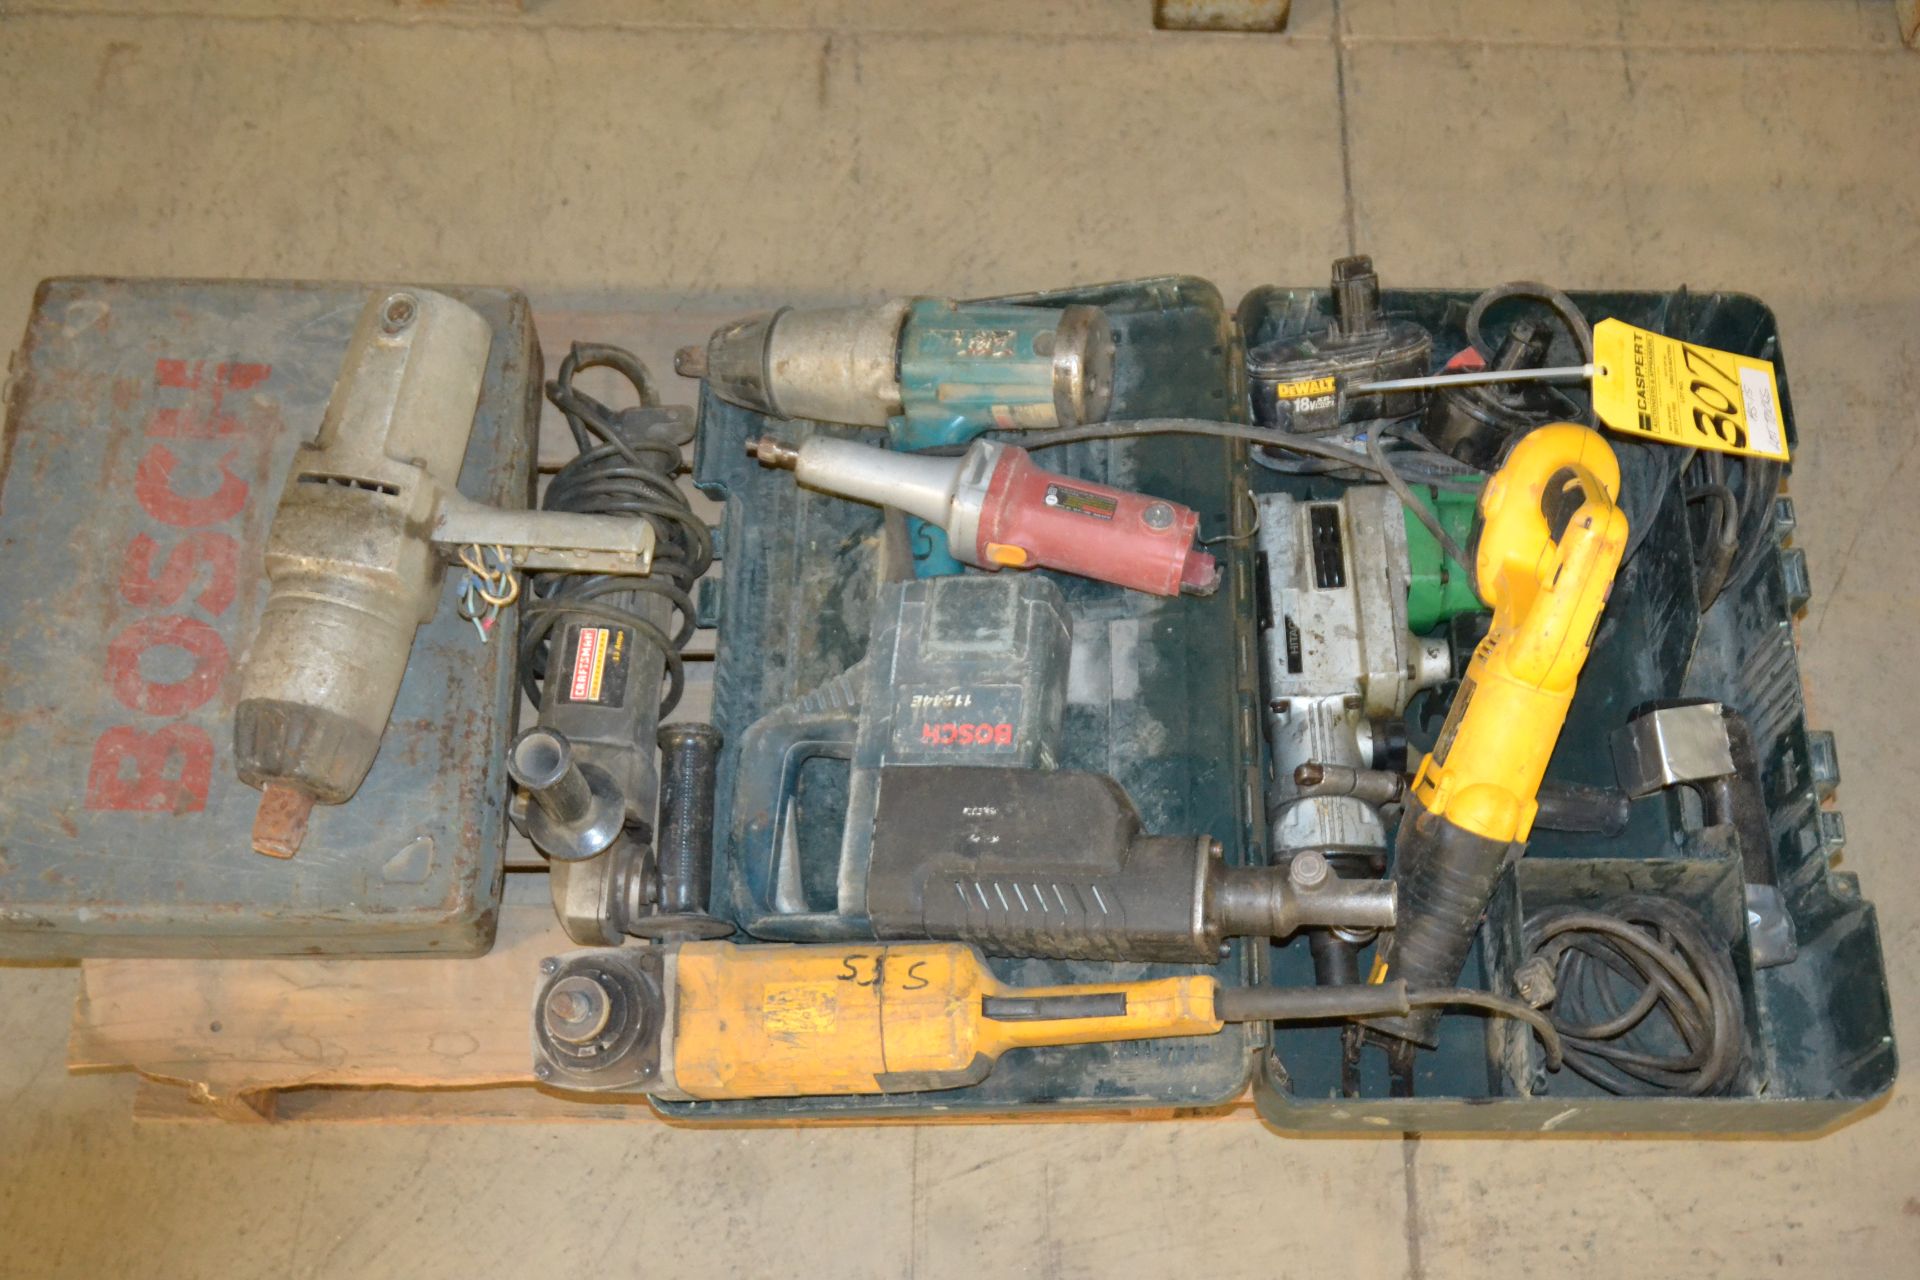 LOT - POWER TOOLS ON SKID - AS-IS